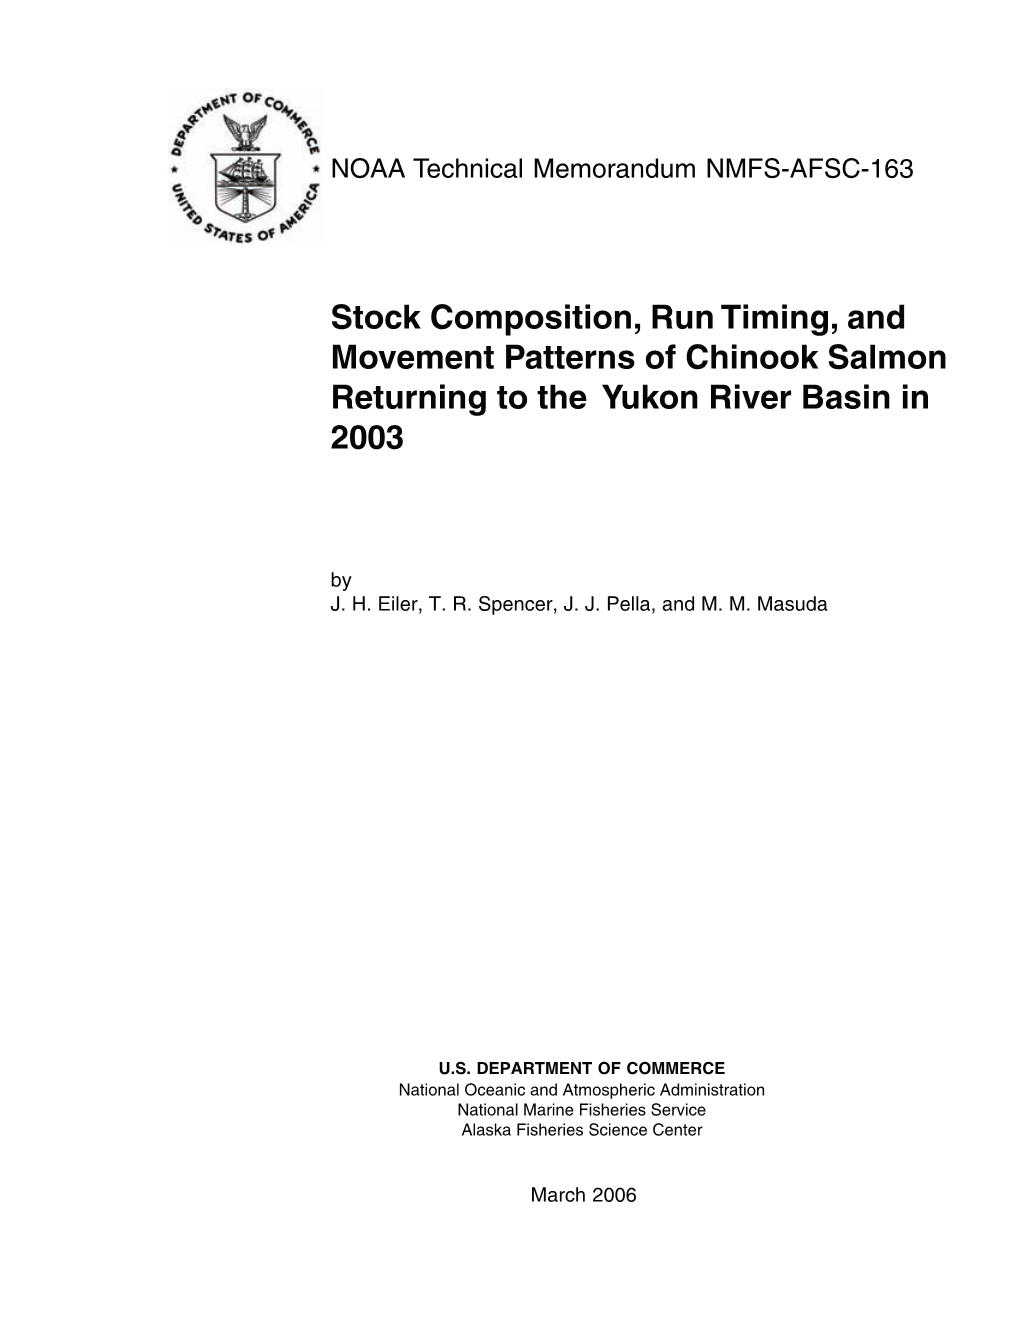 Stock Composition, Run Timing, and Movement Patterns of Chinook Salmon Returning to the Yukon River Basin in 2003